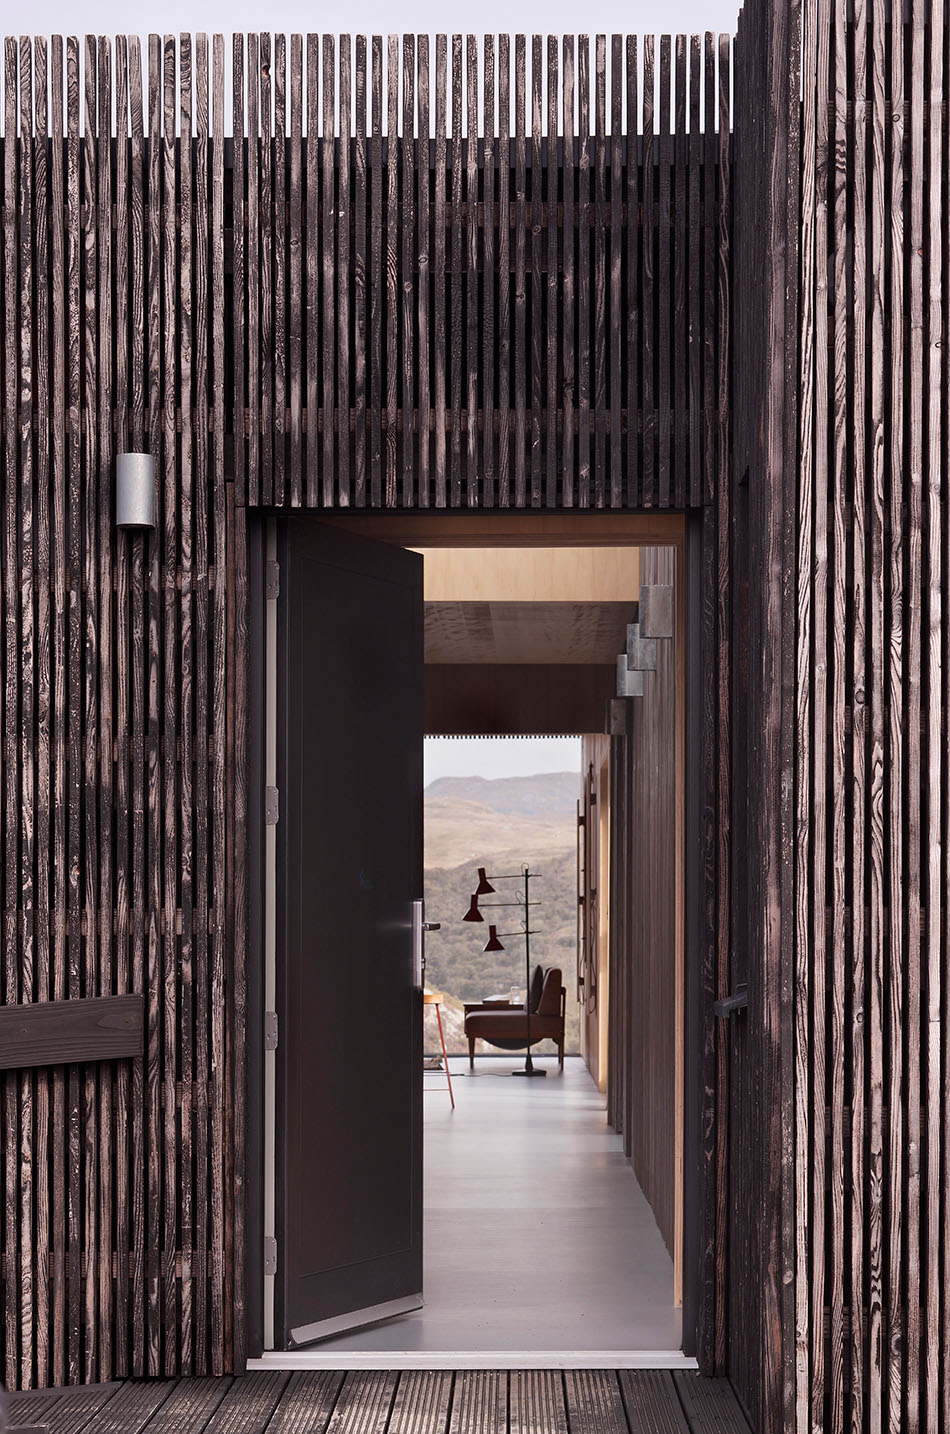 The entryway to An Cala House from the exterior. Larch cladding is seen around the door and the landscape scenery is seen directly as you enter the building.